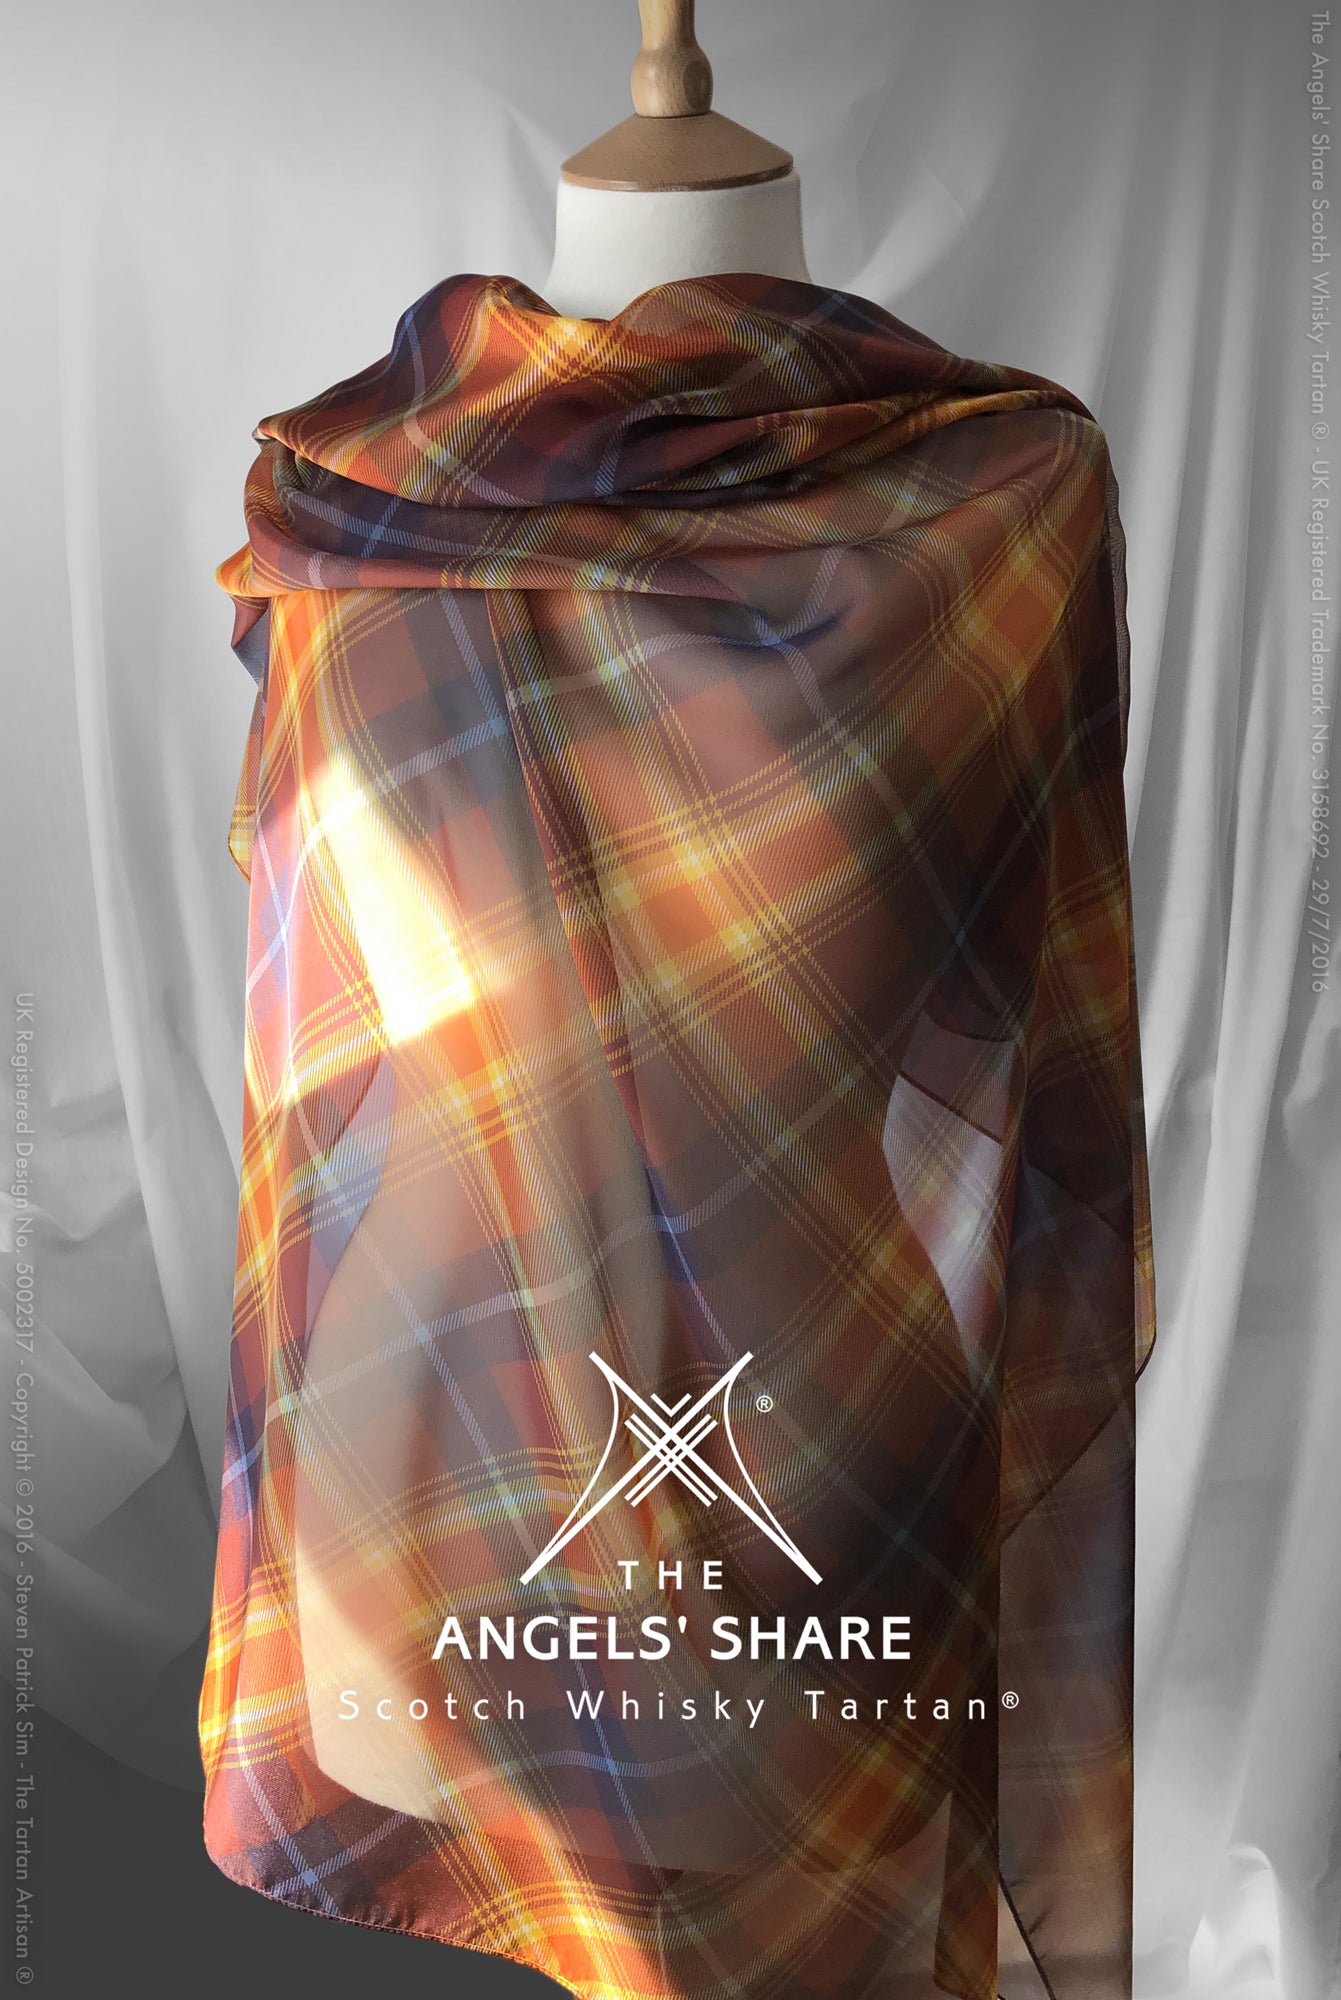 The Angels' Share Scotch Whisky Tartan® Paris Chiffon Scarf the ideal gift